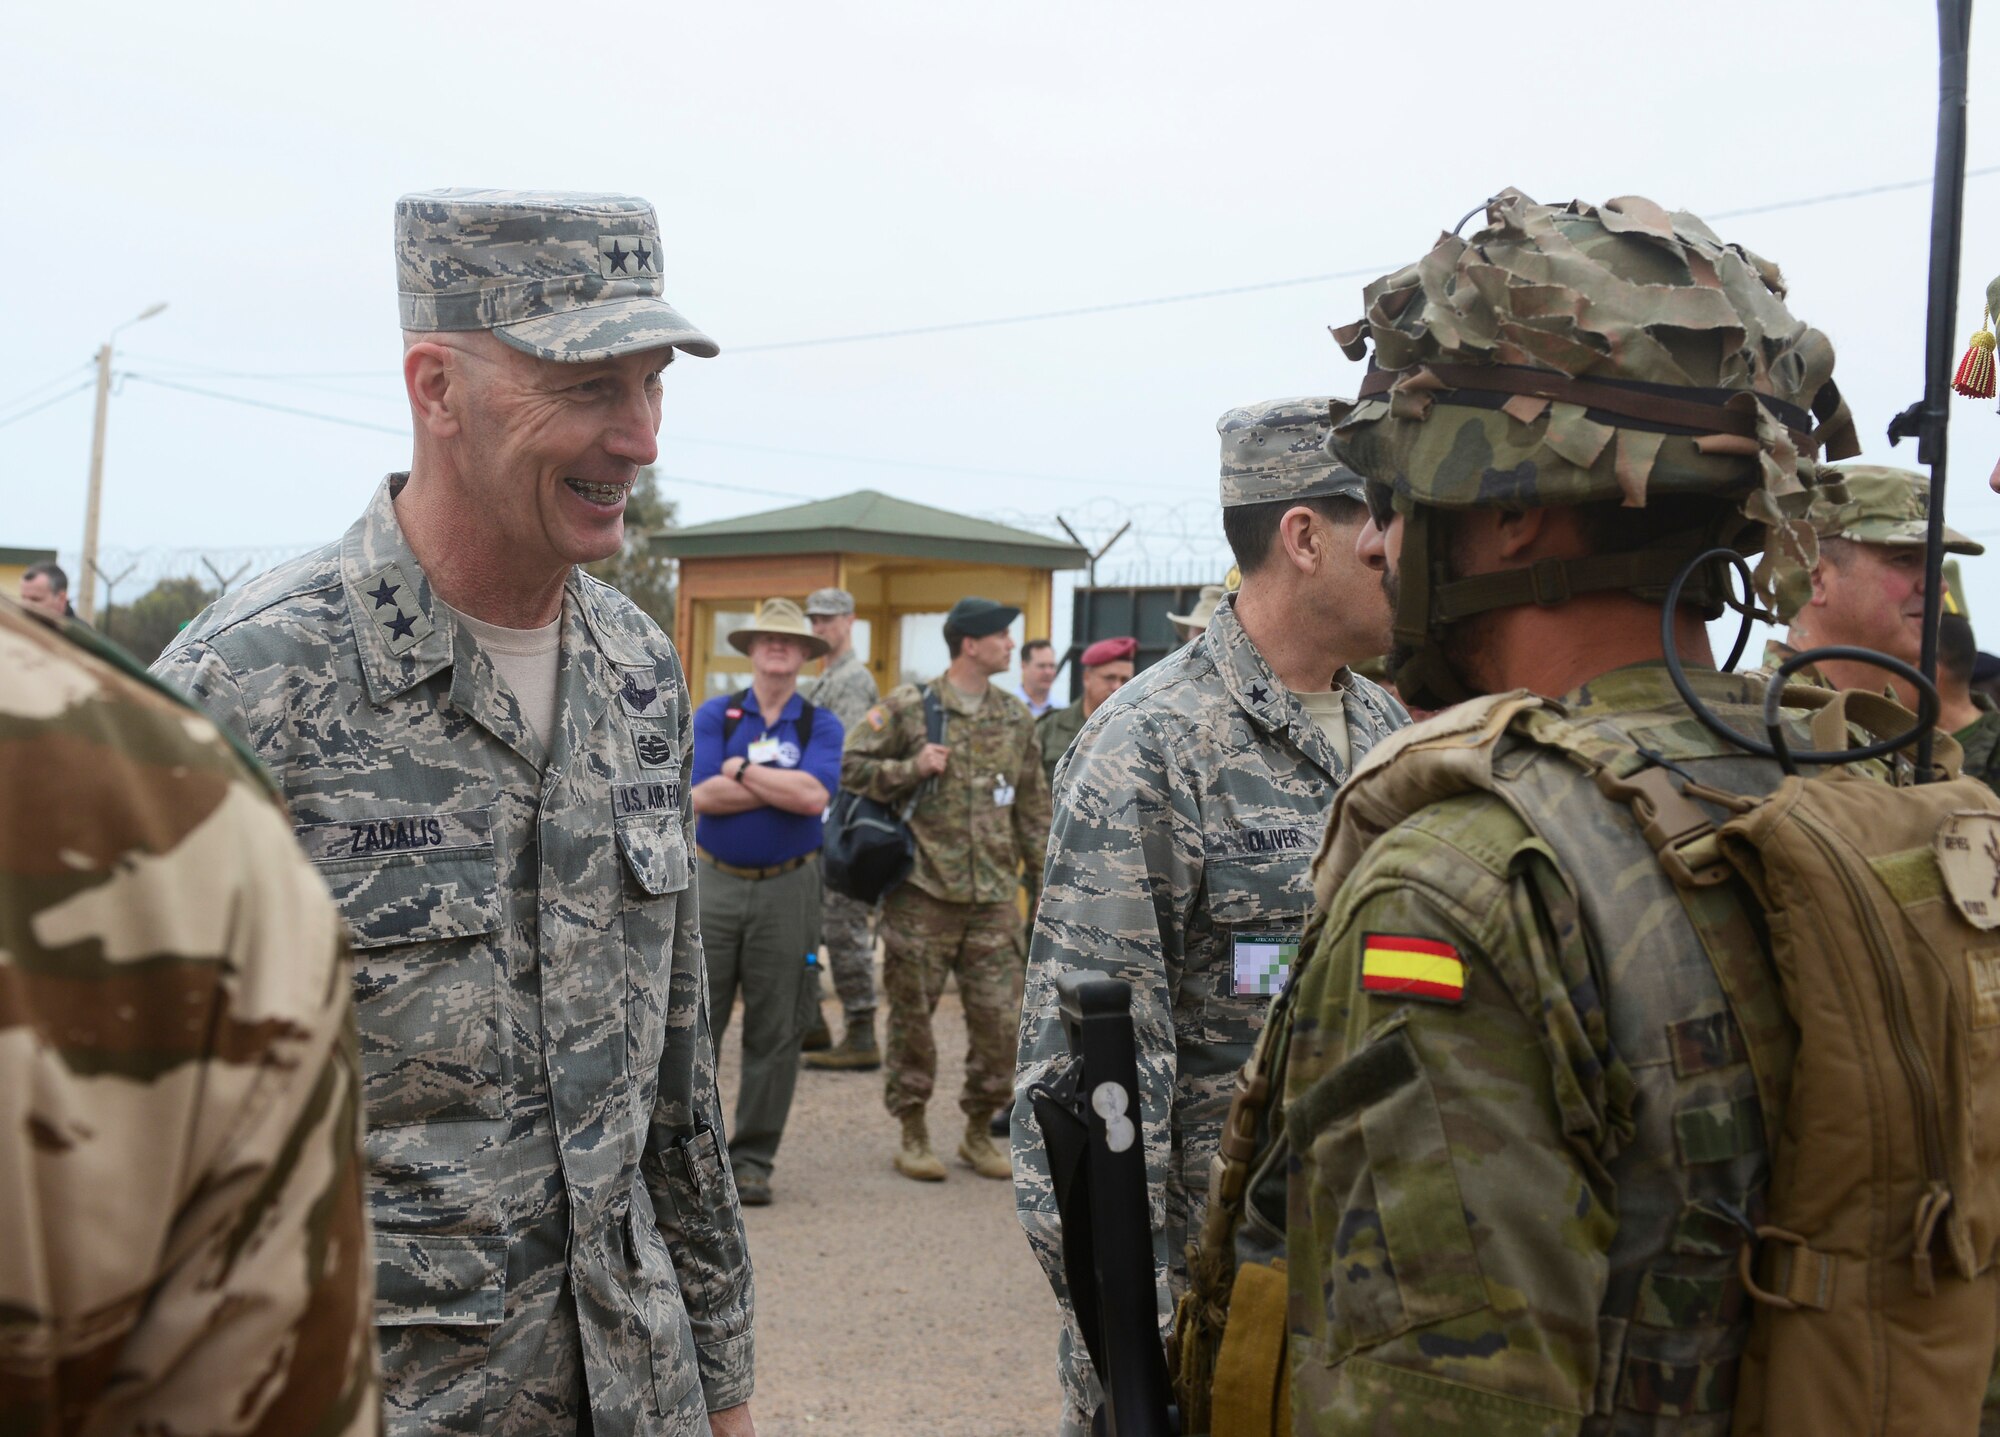 U.S. Air Force Maj. Gen. Timothy Zadalis, U.S. Air Forces in Europe-Air Forces Africa vice commander, speaks with a Spanish Legion army soldier during AFRICAN LION 16 at Tifnit, Kingdom of Morocco, April 26, 2016. The annual exercise involved familiarization with various countries military techniques to improve interoperability between countries. (U.S. Air Force photo illustration by Senior Airman Krystal Ardrey/Released)